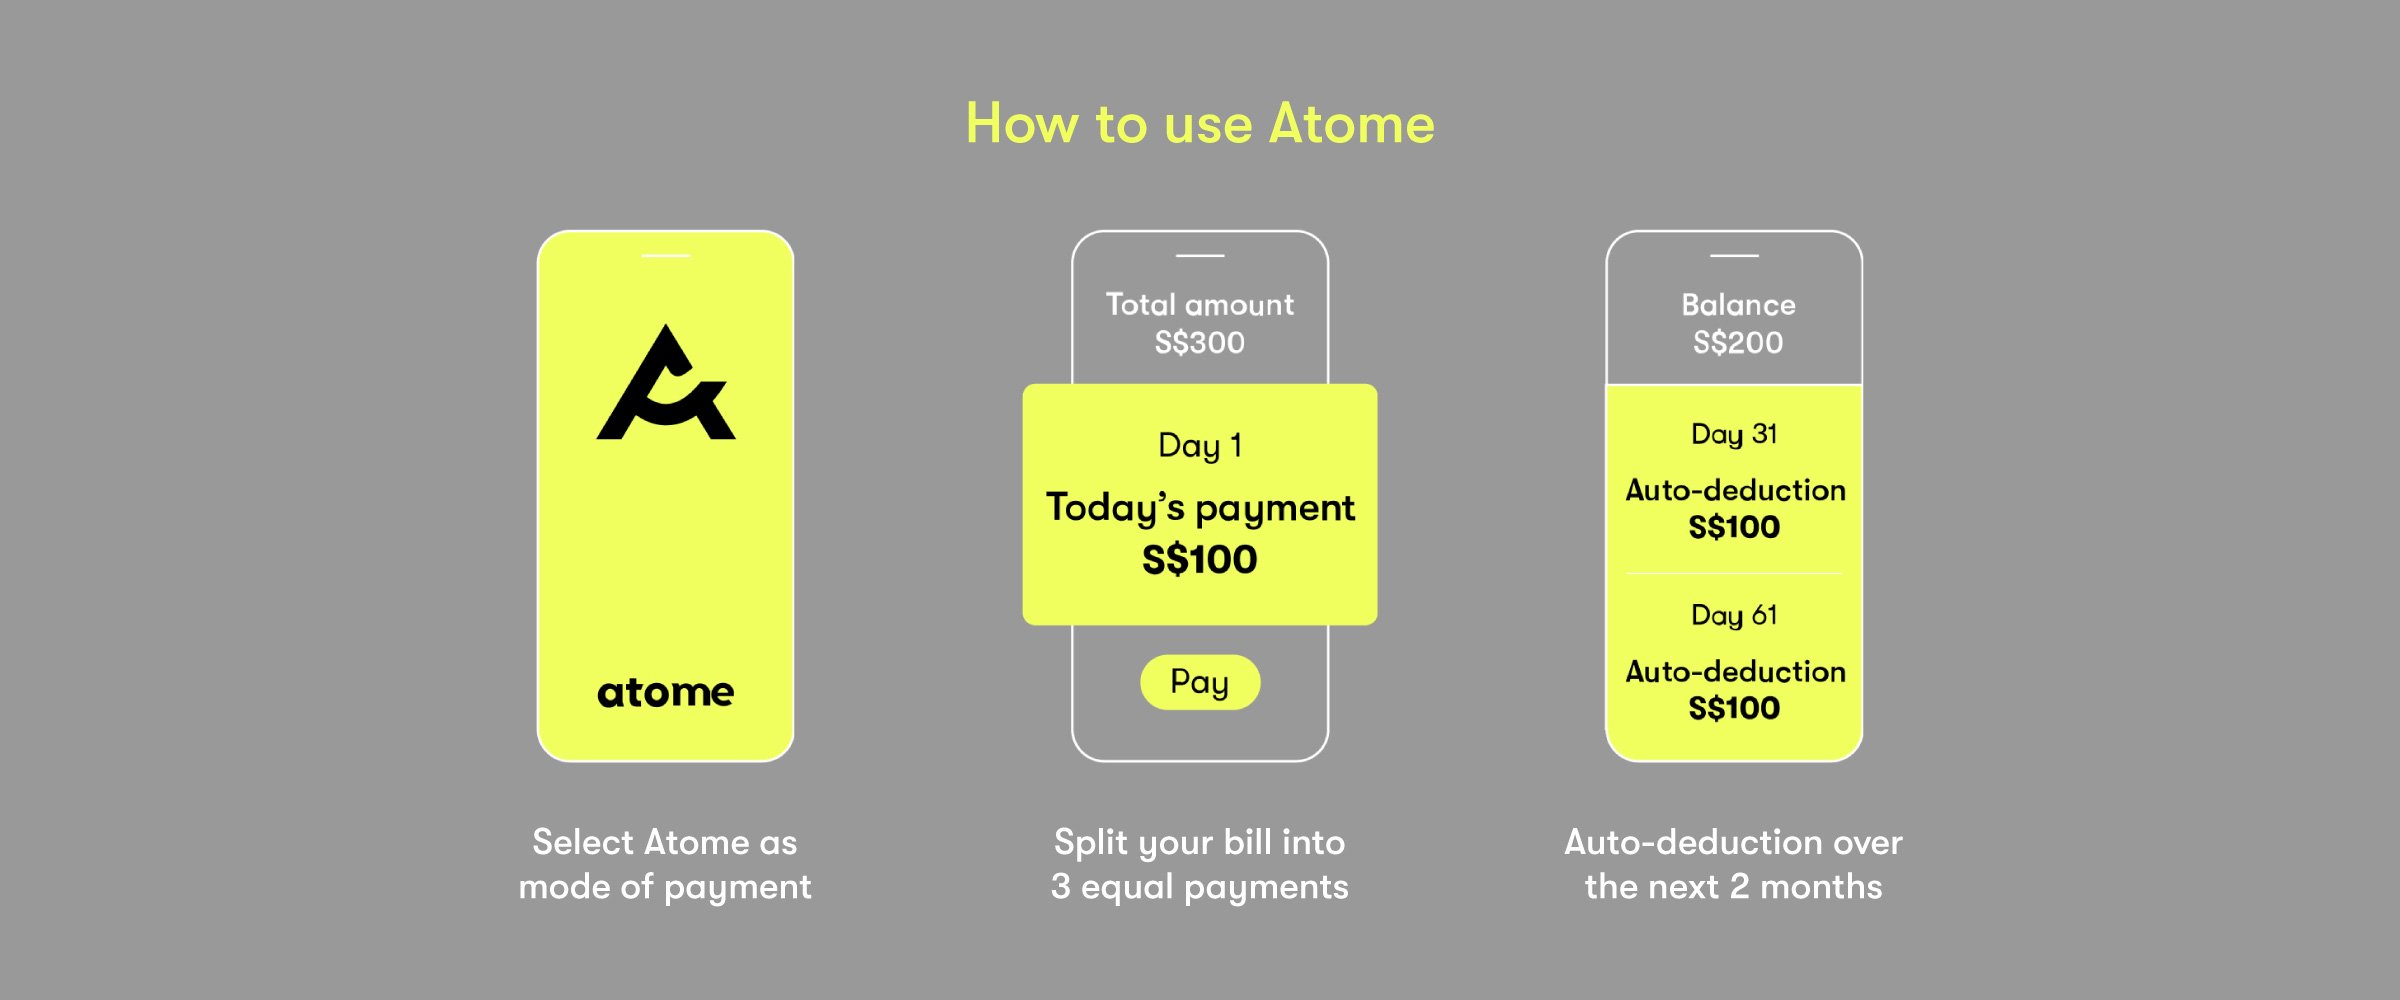 How to use Atome